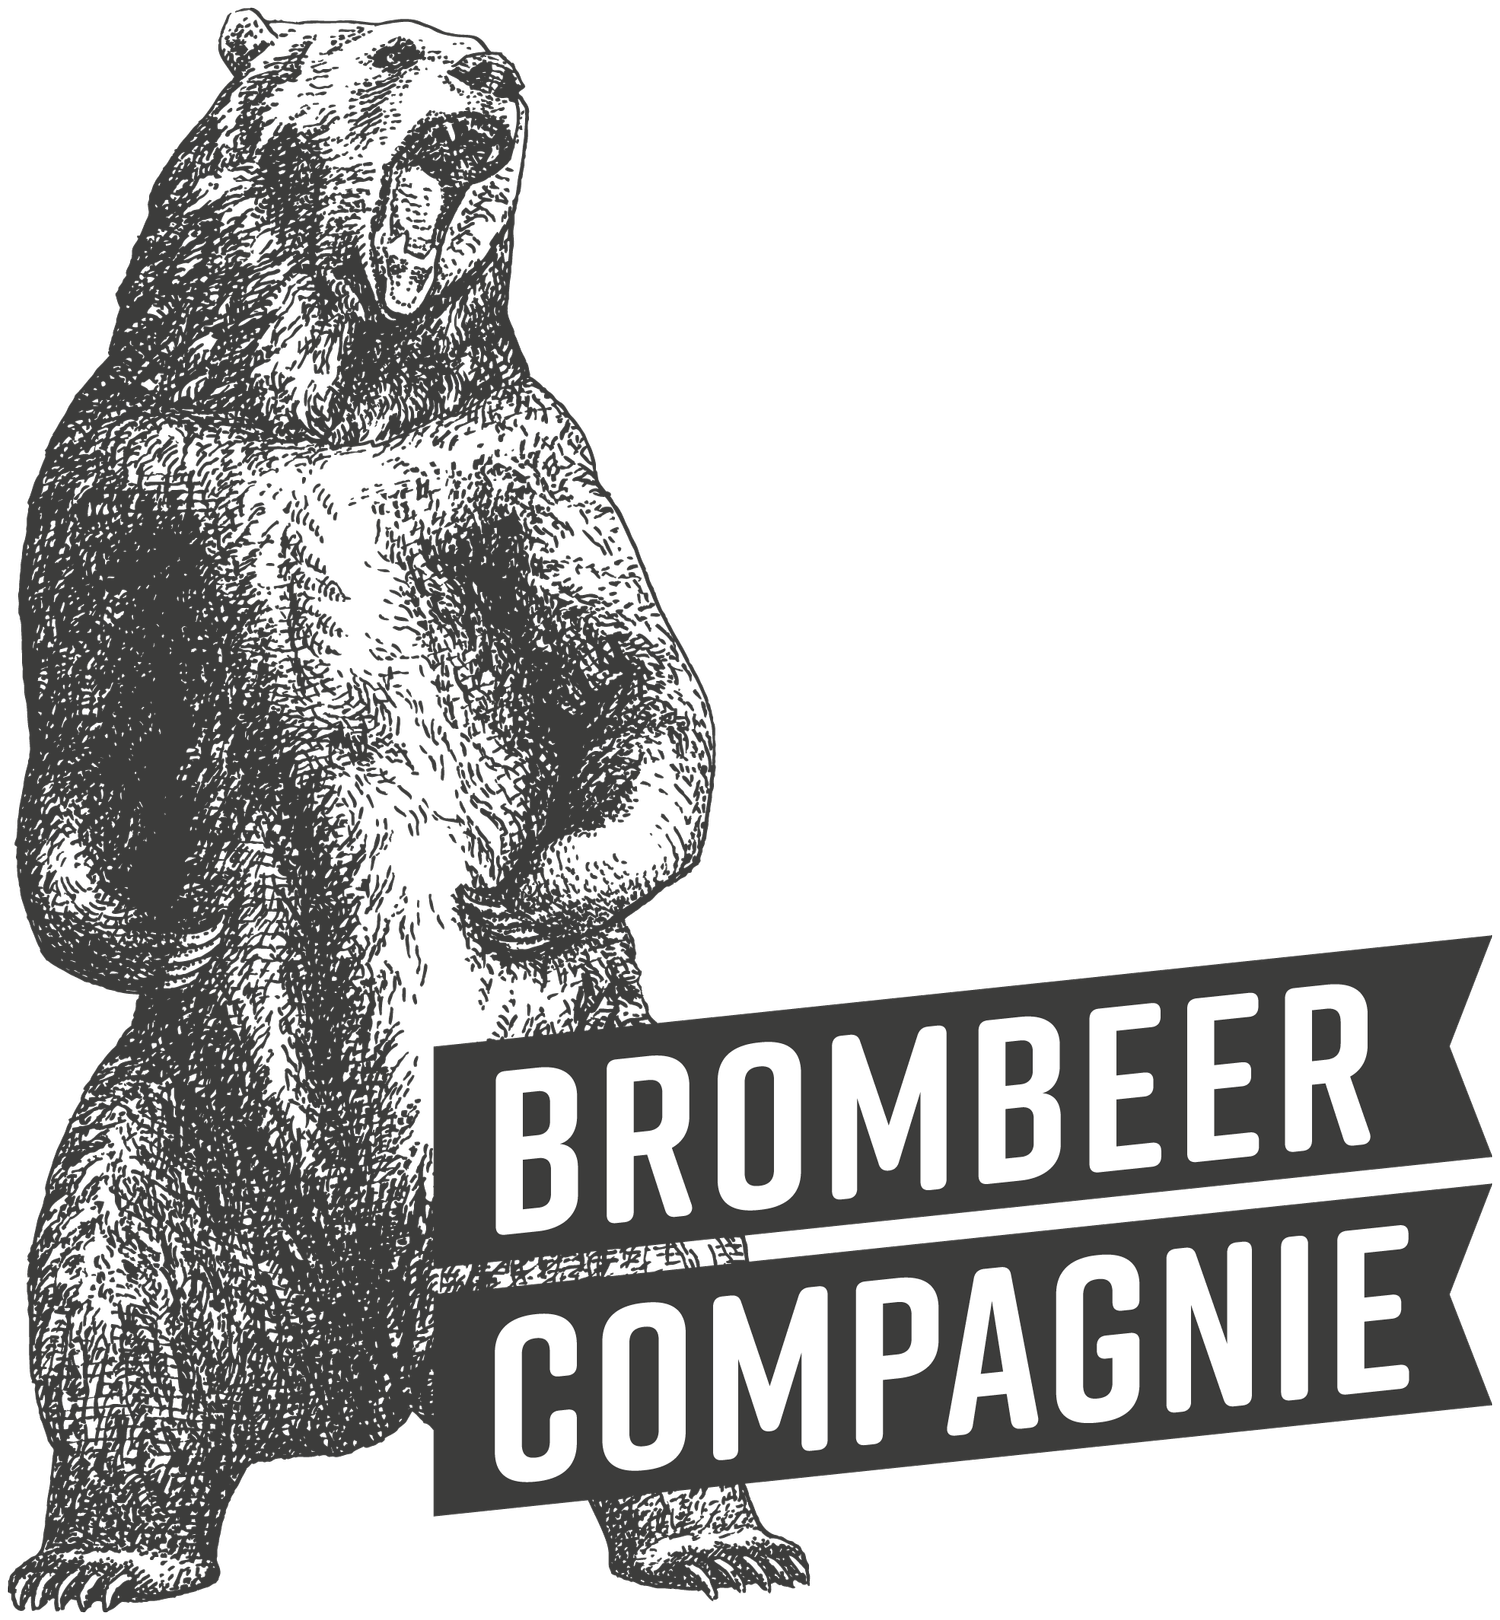 Brombeercompagnie